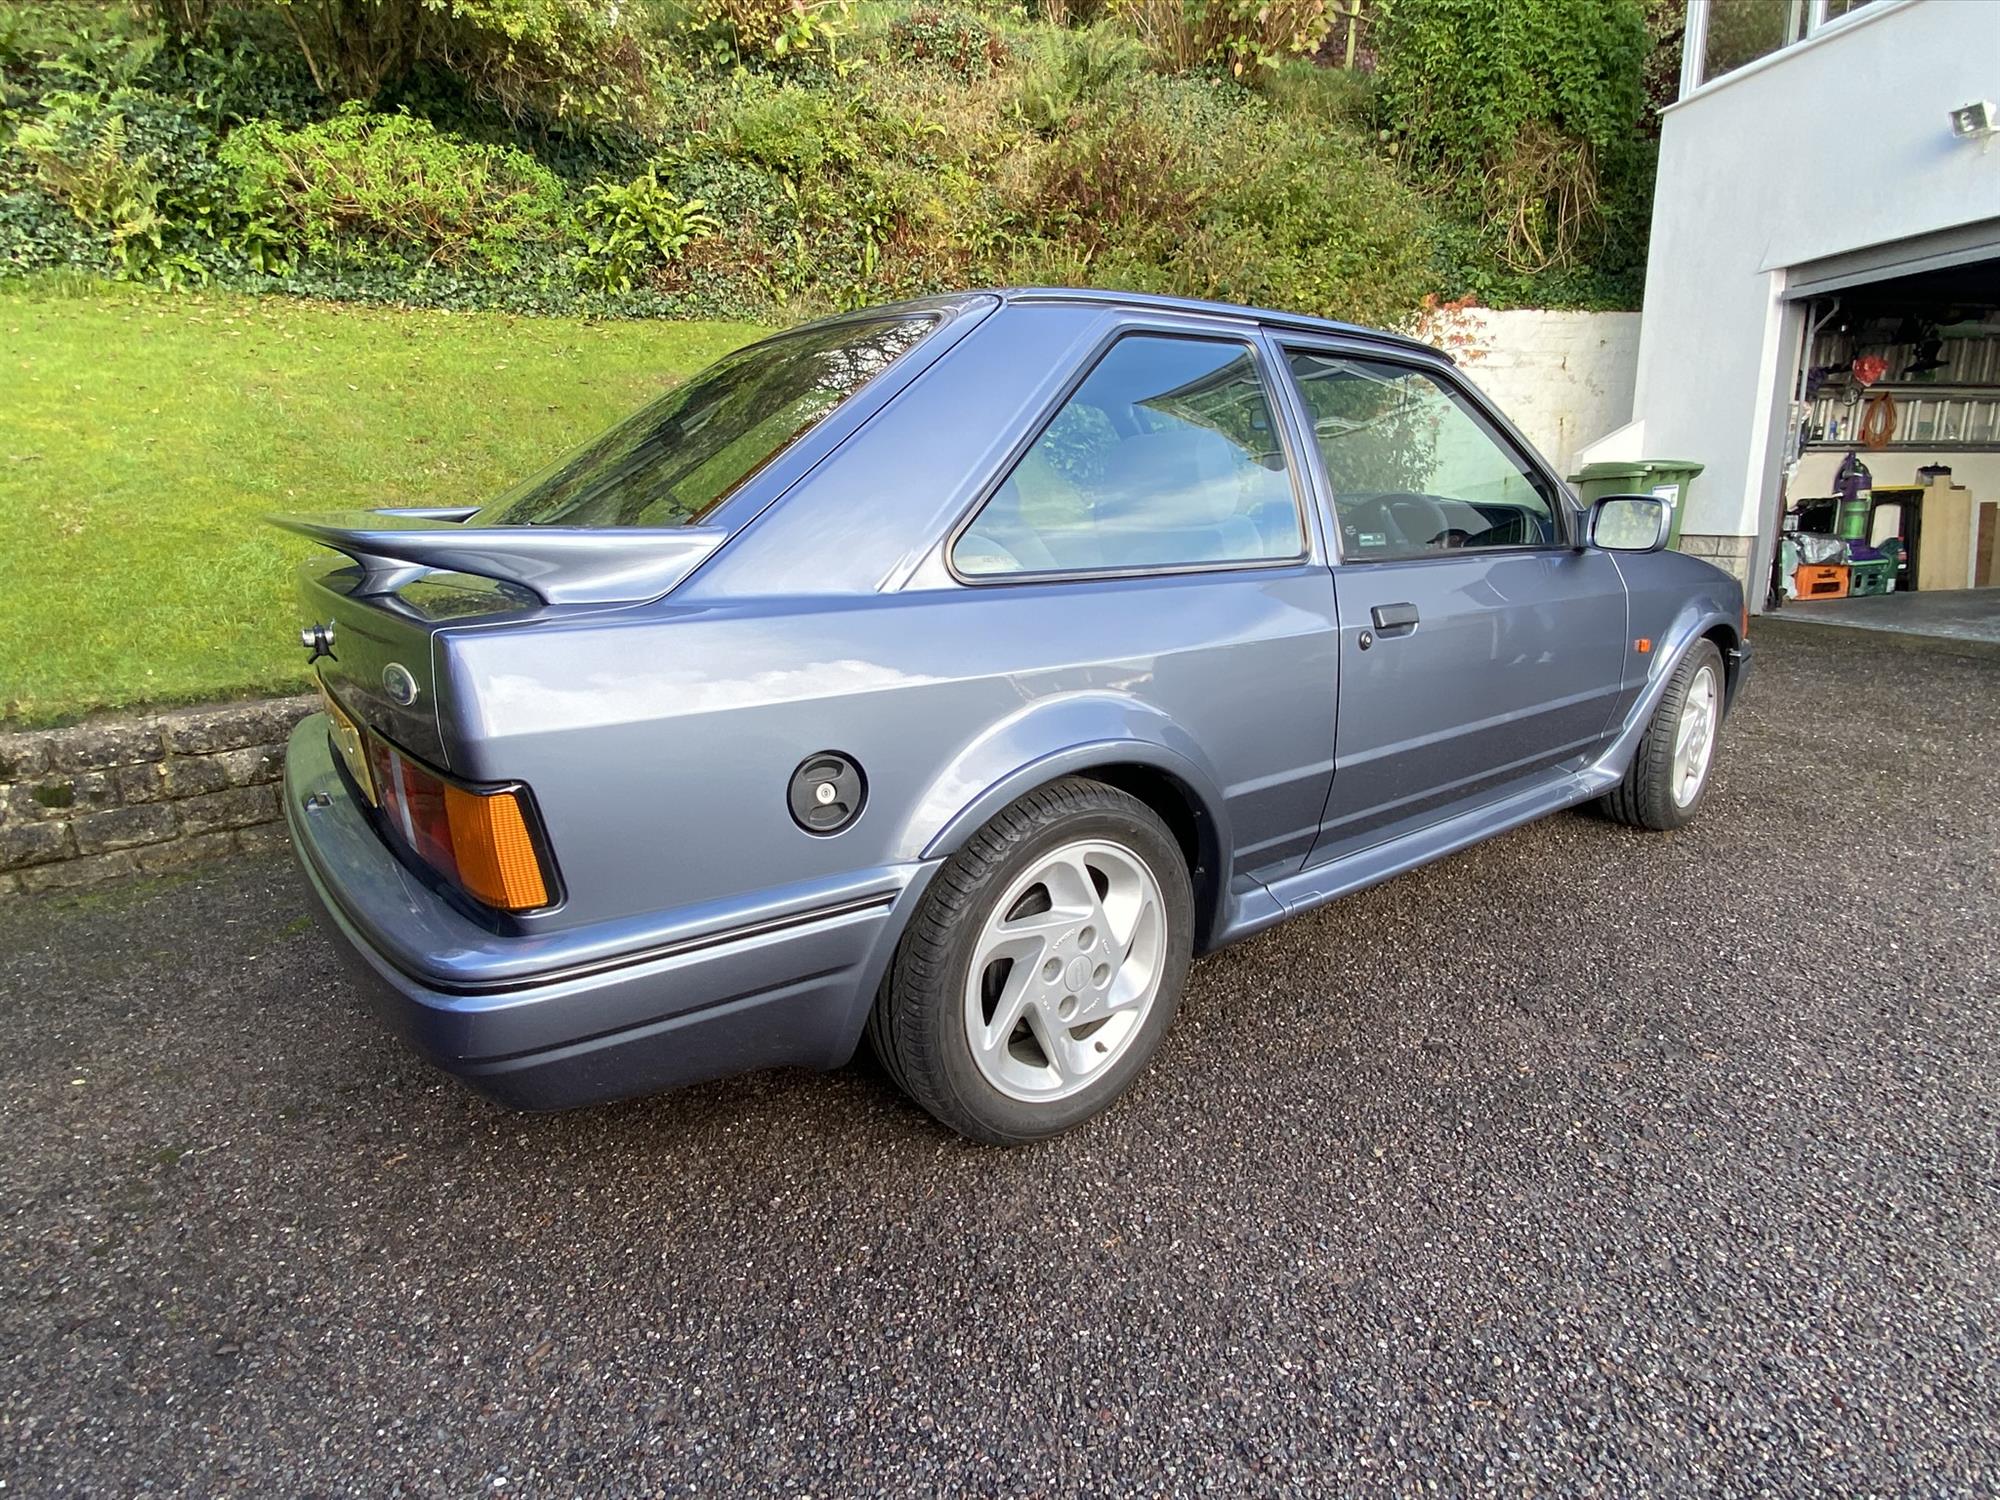 1989 Ford Escort RS Turbo S2 - Image 4 of 20